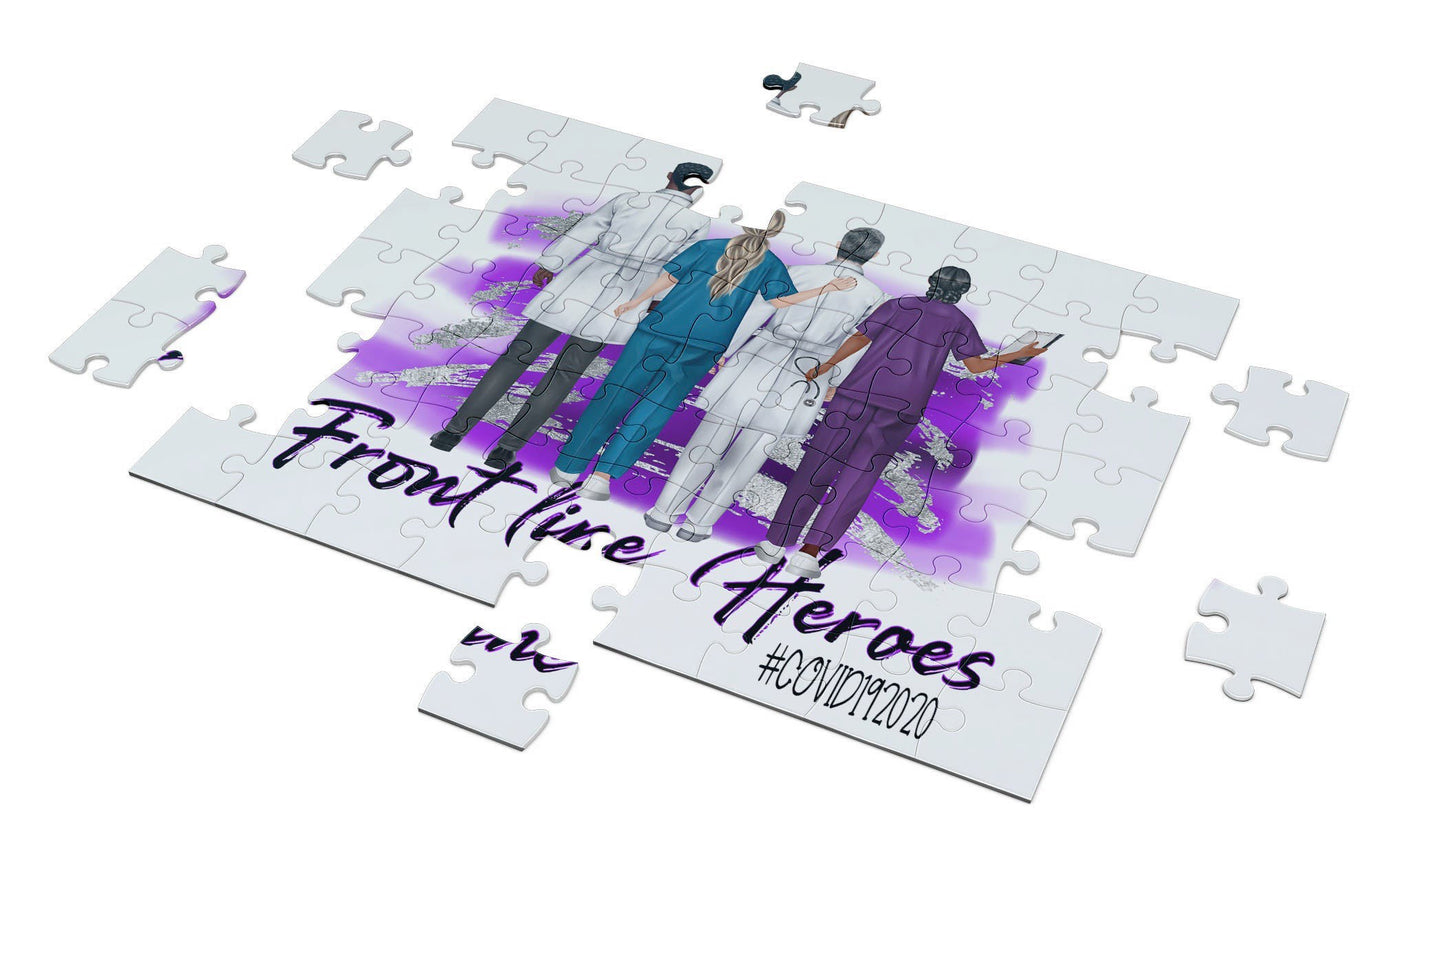 Modern Heroes - Nurse Medical Doctor Heroes Puzzles - Thank You Gifts - Busybee Creates